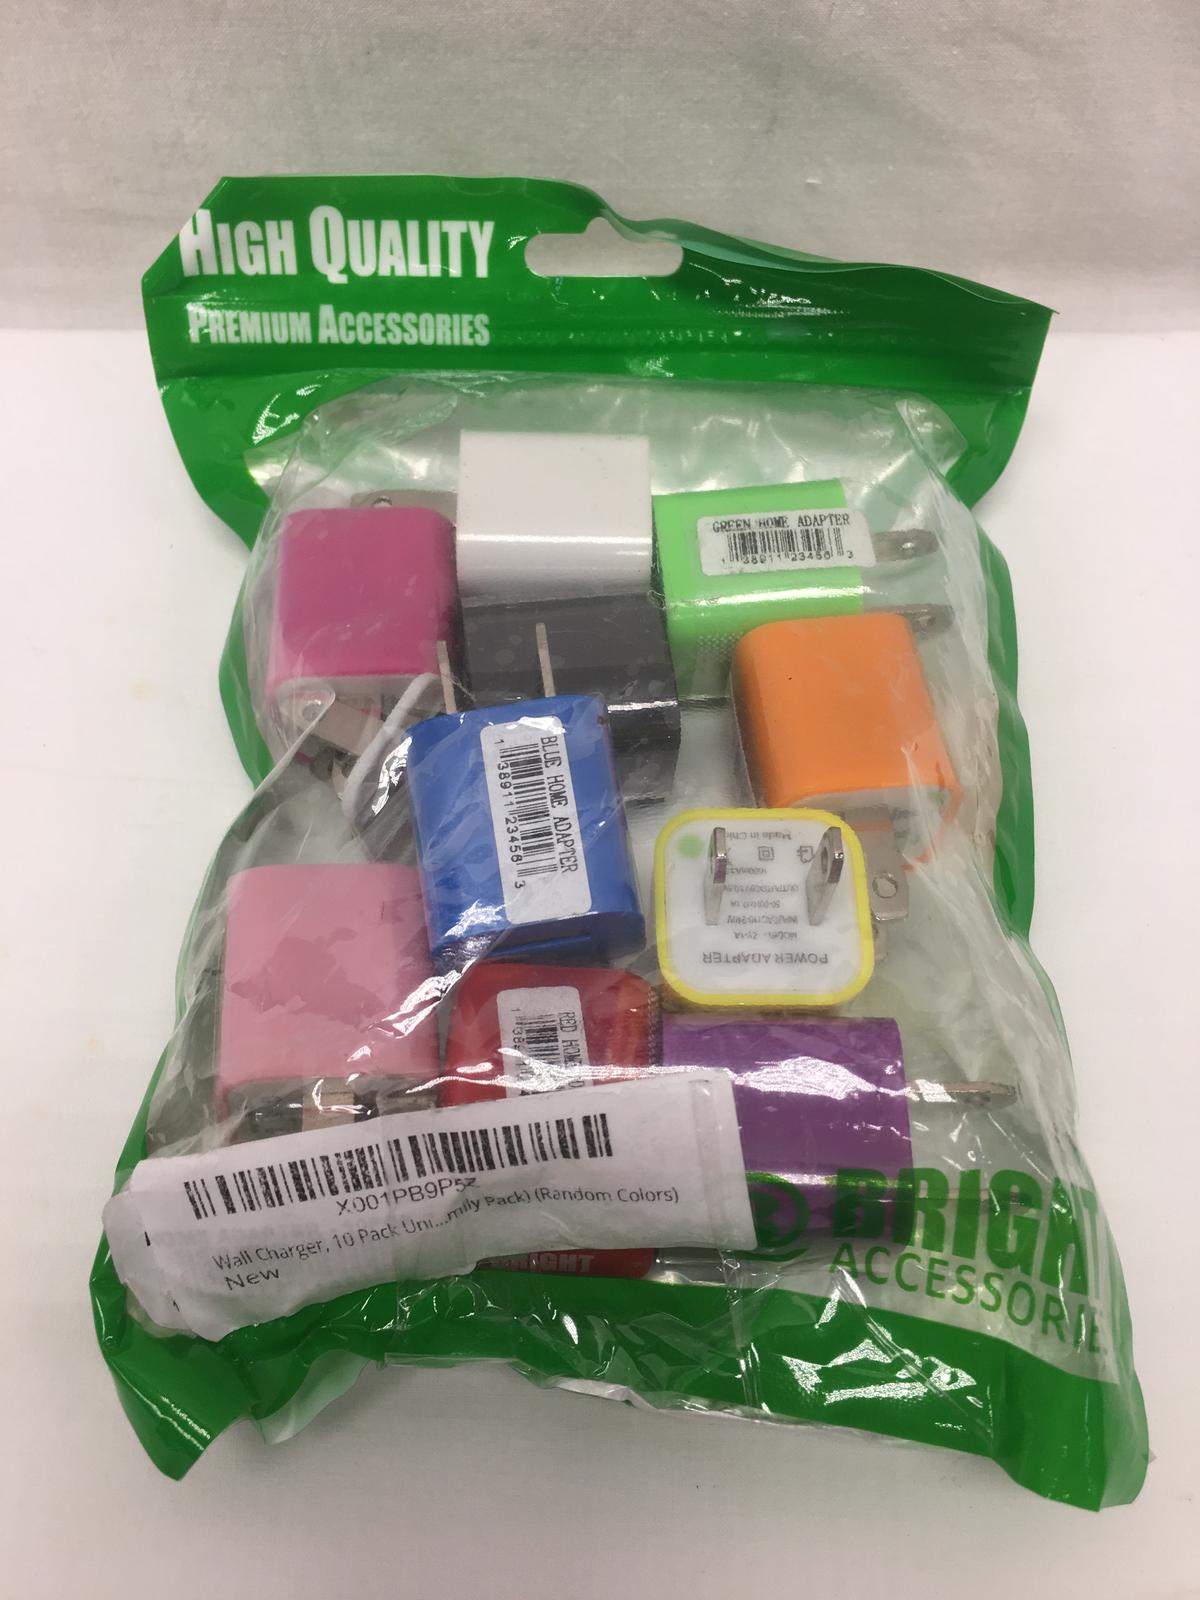 Bright High Quality Wall Chargers/9 Pack